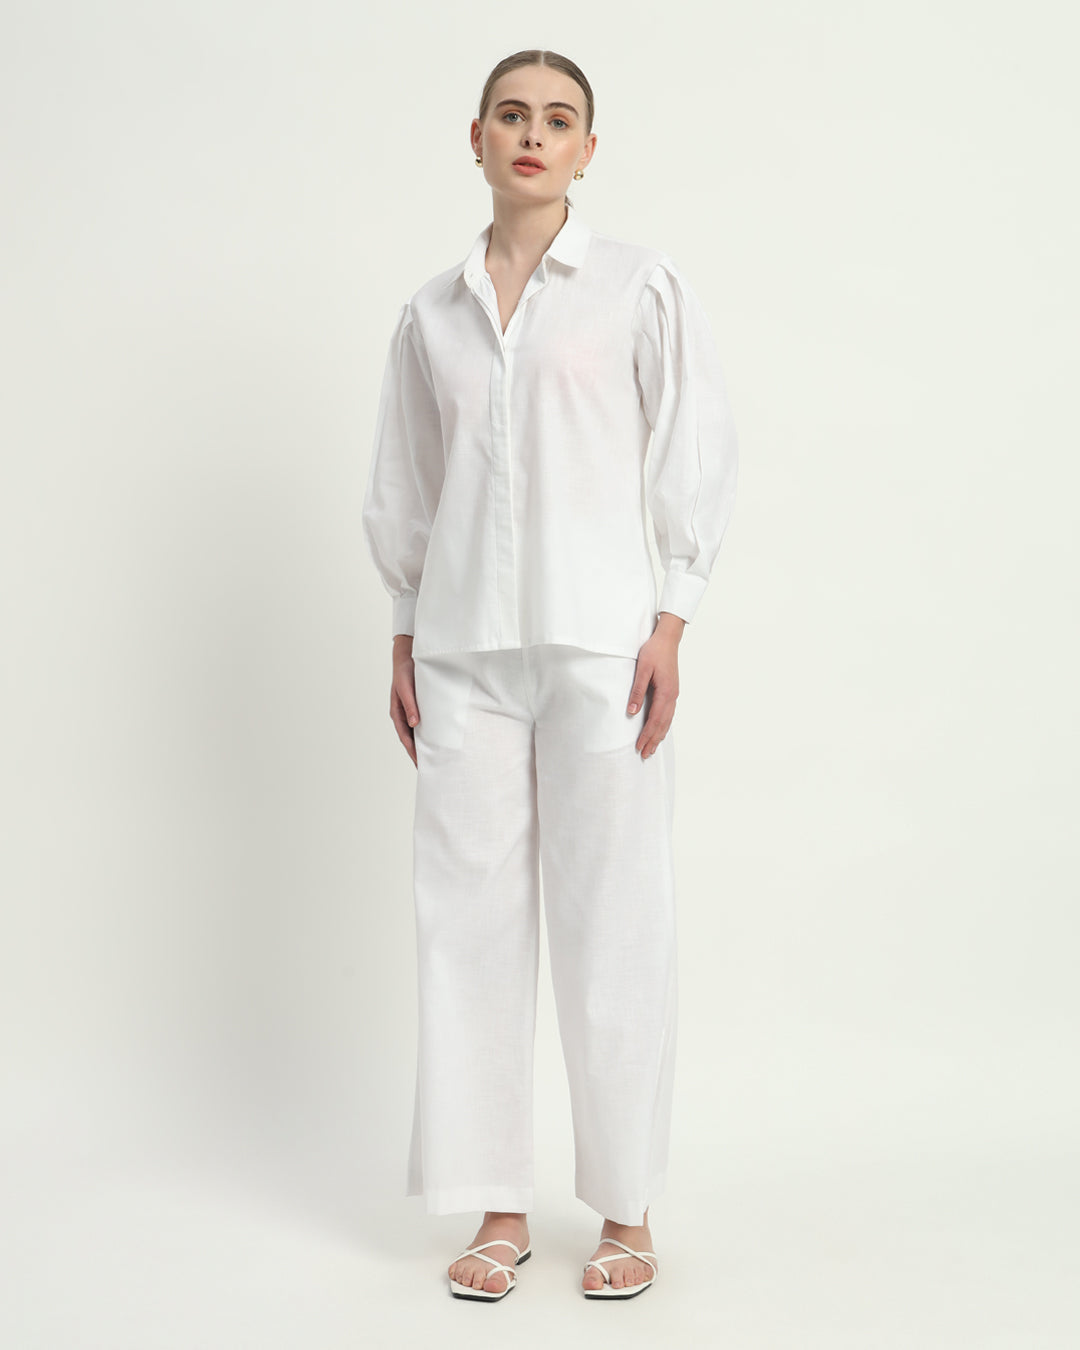 Pants Matching Set- White Linen Flare & Flair